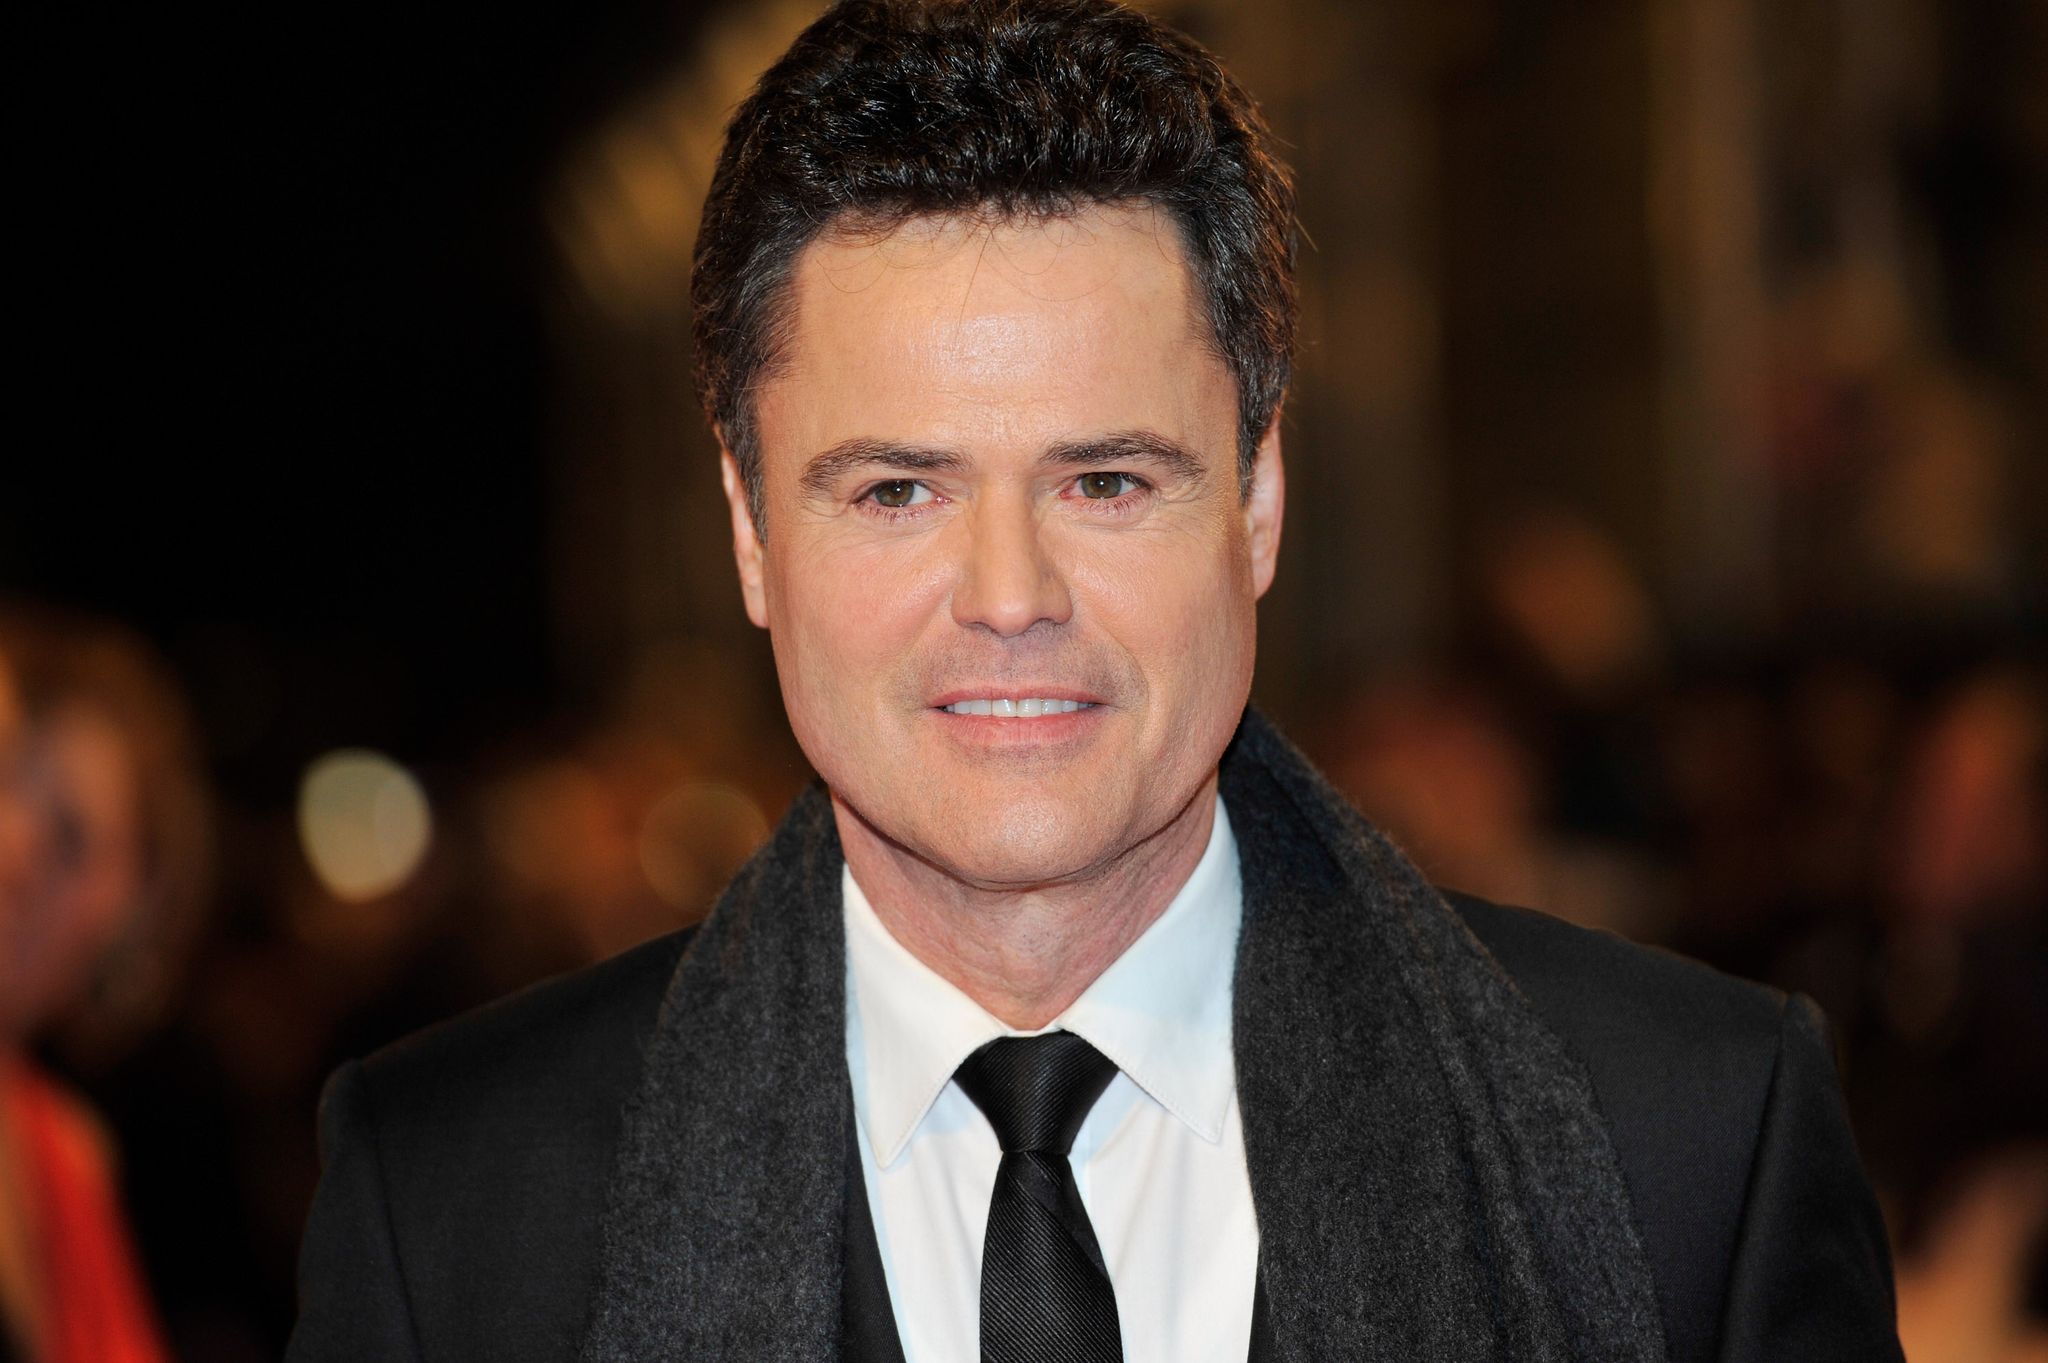 Donny Osmond at the the National Television Awards at 02 Arena on January 23, 2013 in London, England.  | Photo: Getty Images